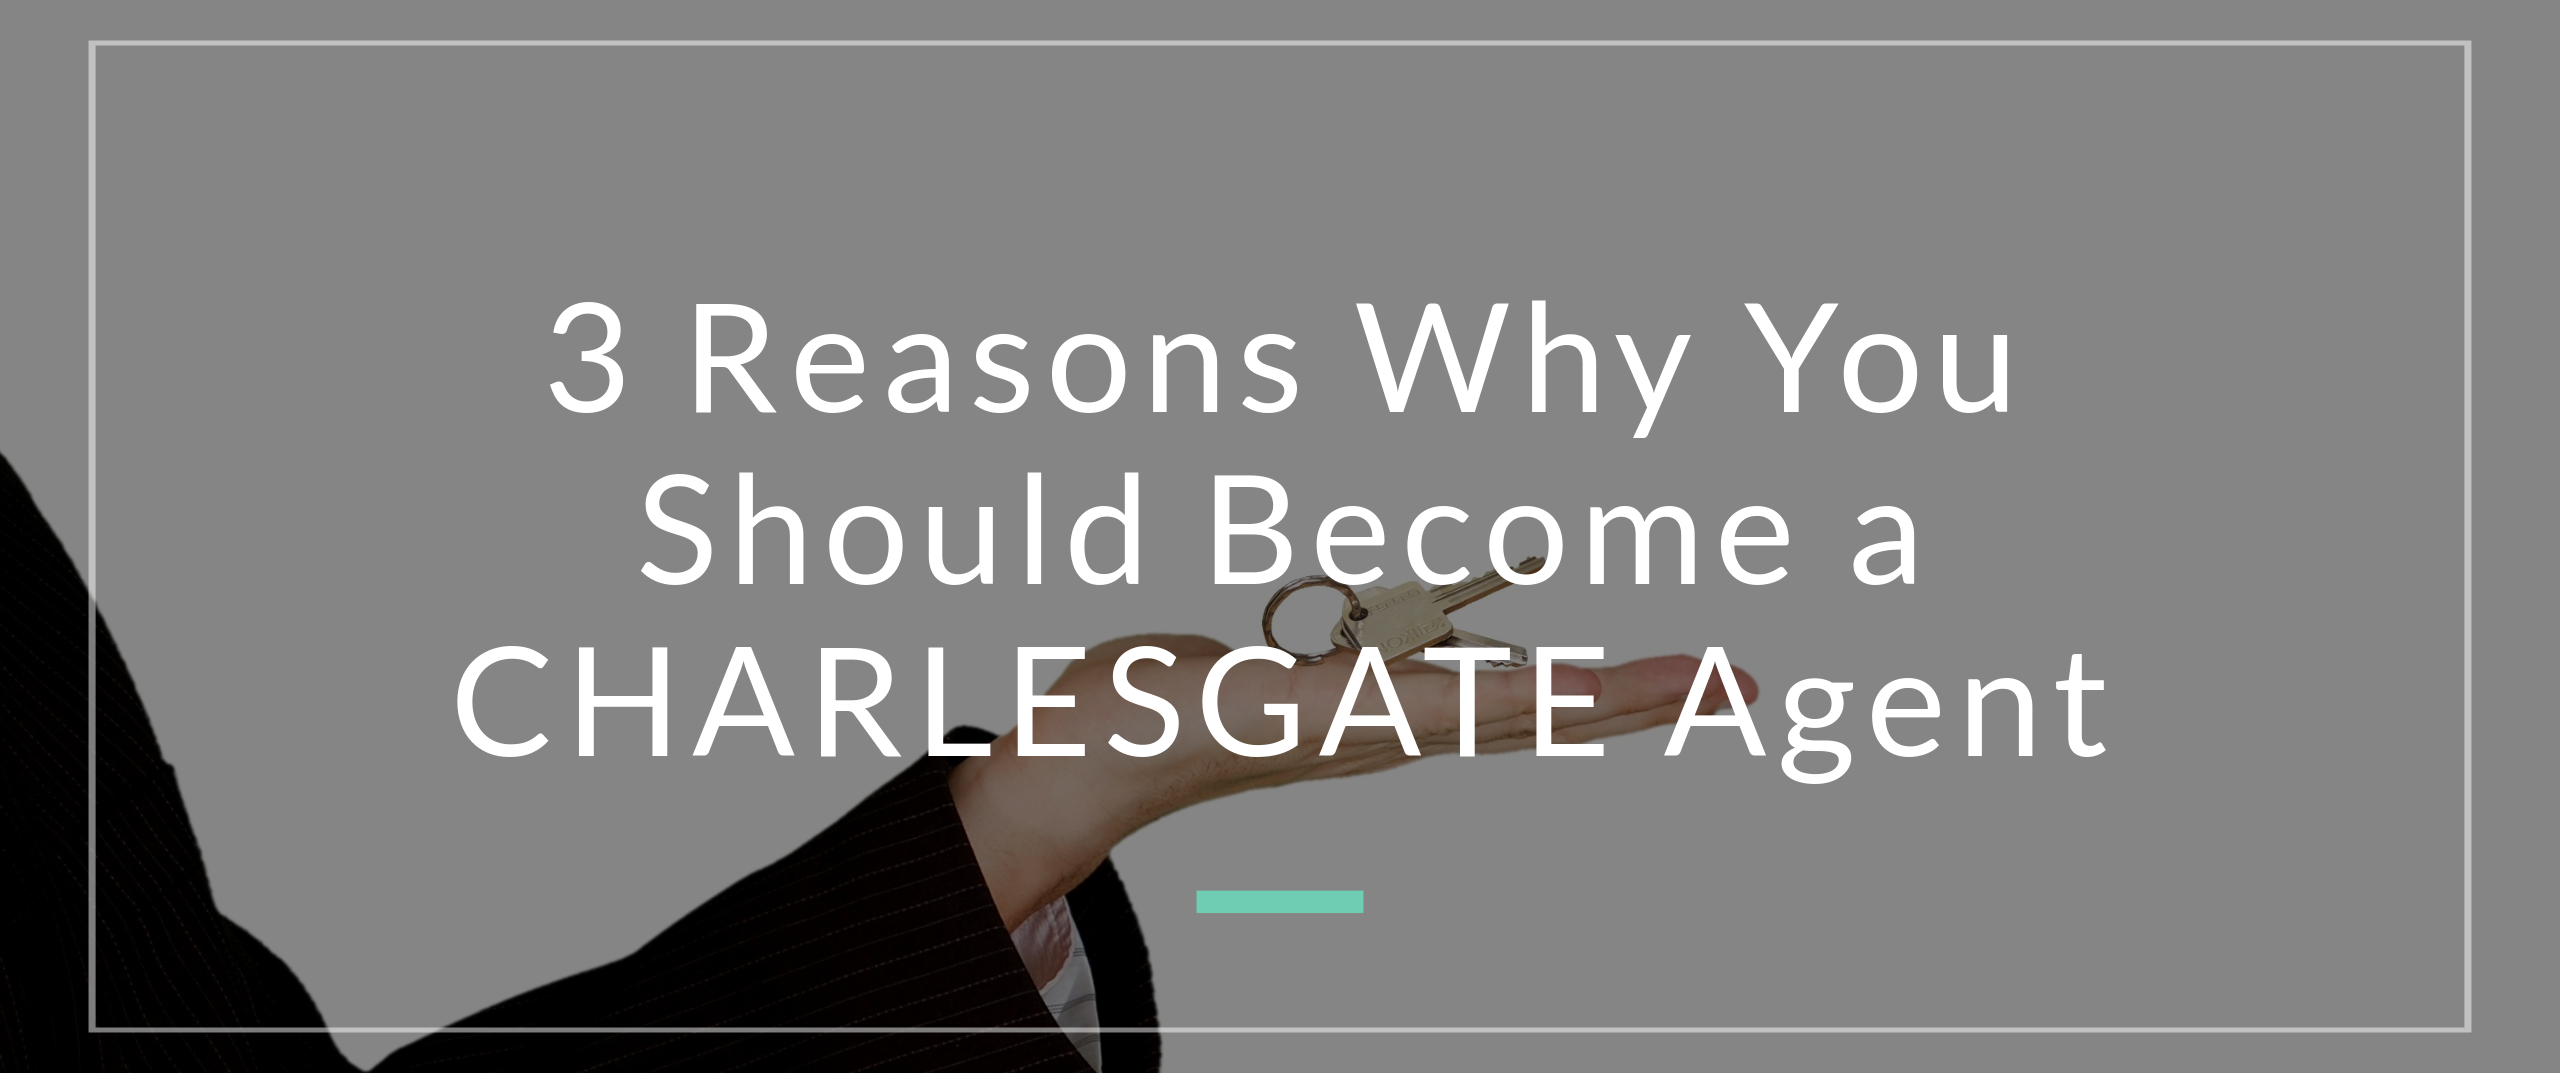 3 Reasons Why You Should Become a CHARLESGATE Agent